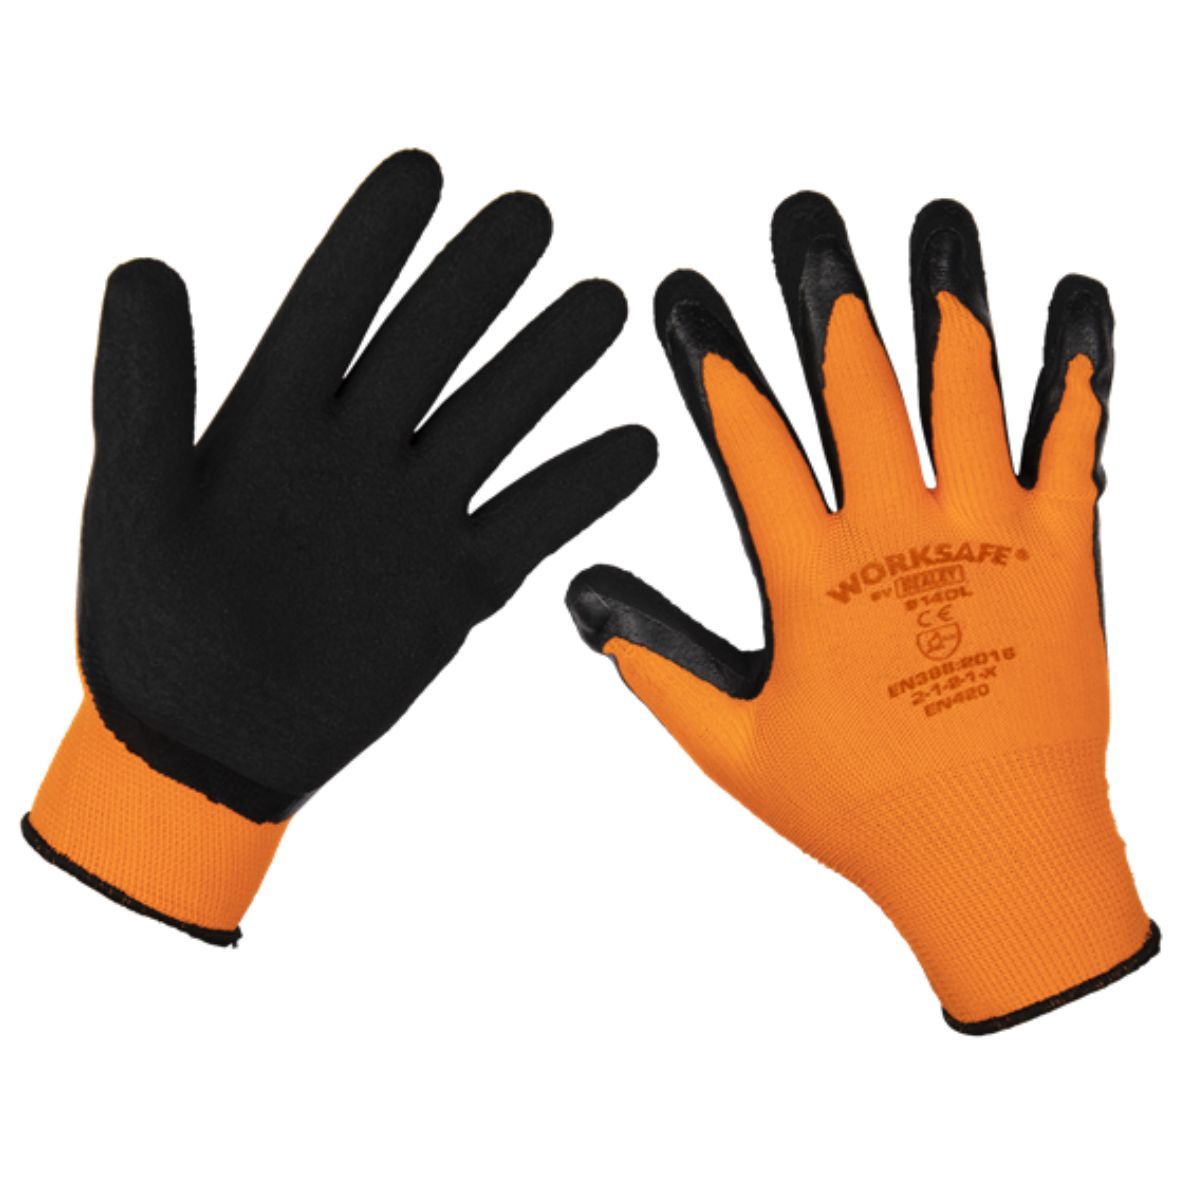 Sealey 9140L/B120 Foam Latex Grippa Gloves (Large) Pack of 120 Pairs